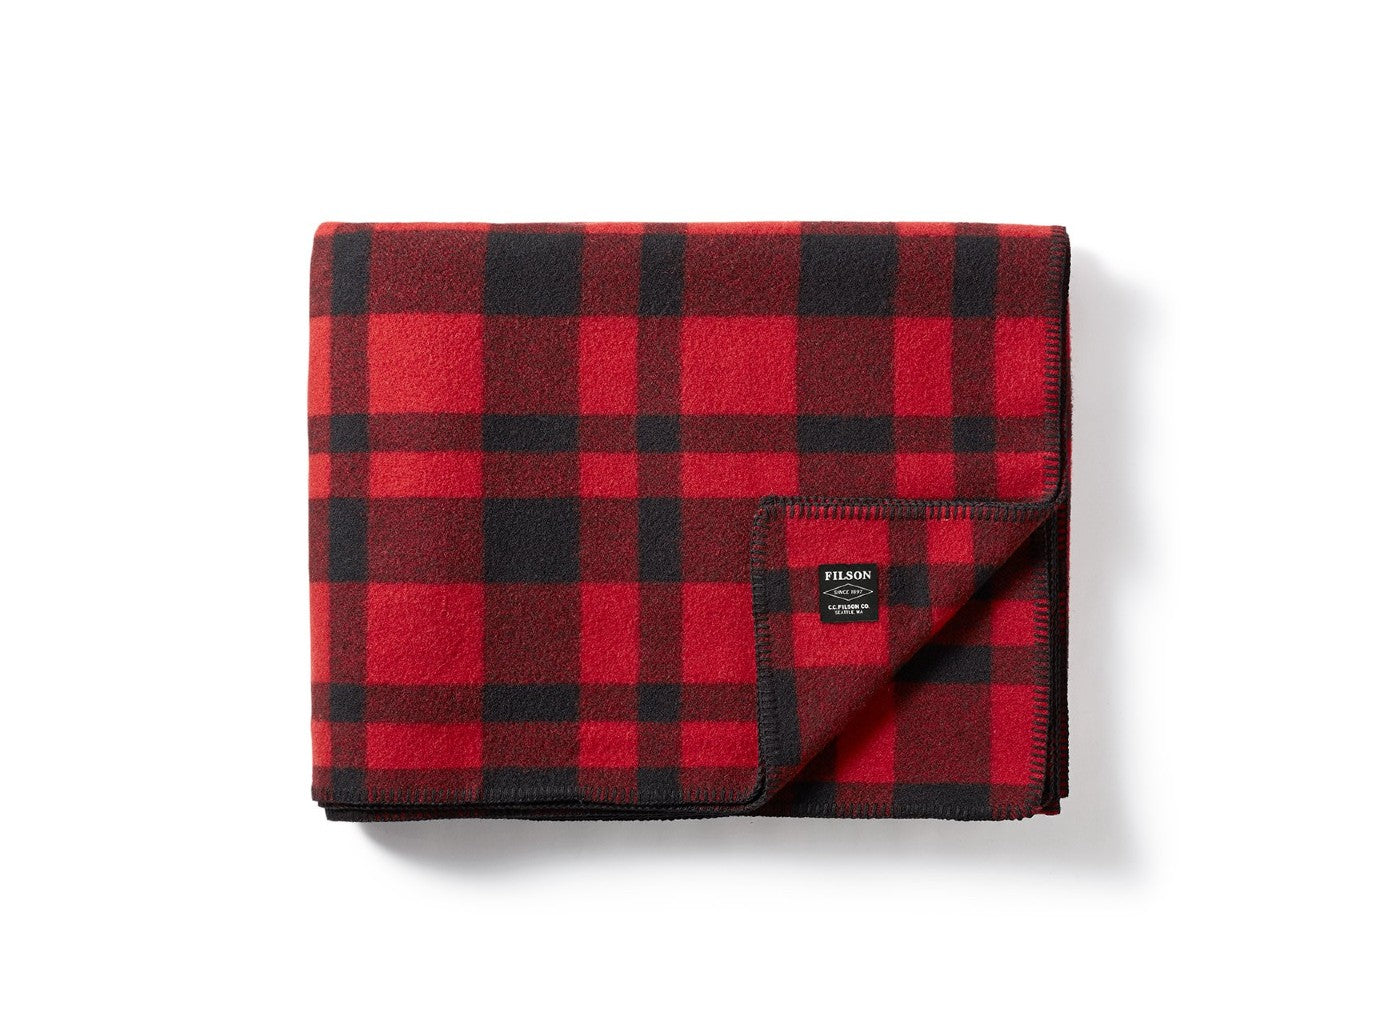 Filson Mackinaw Blanket in red and black